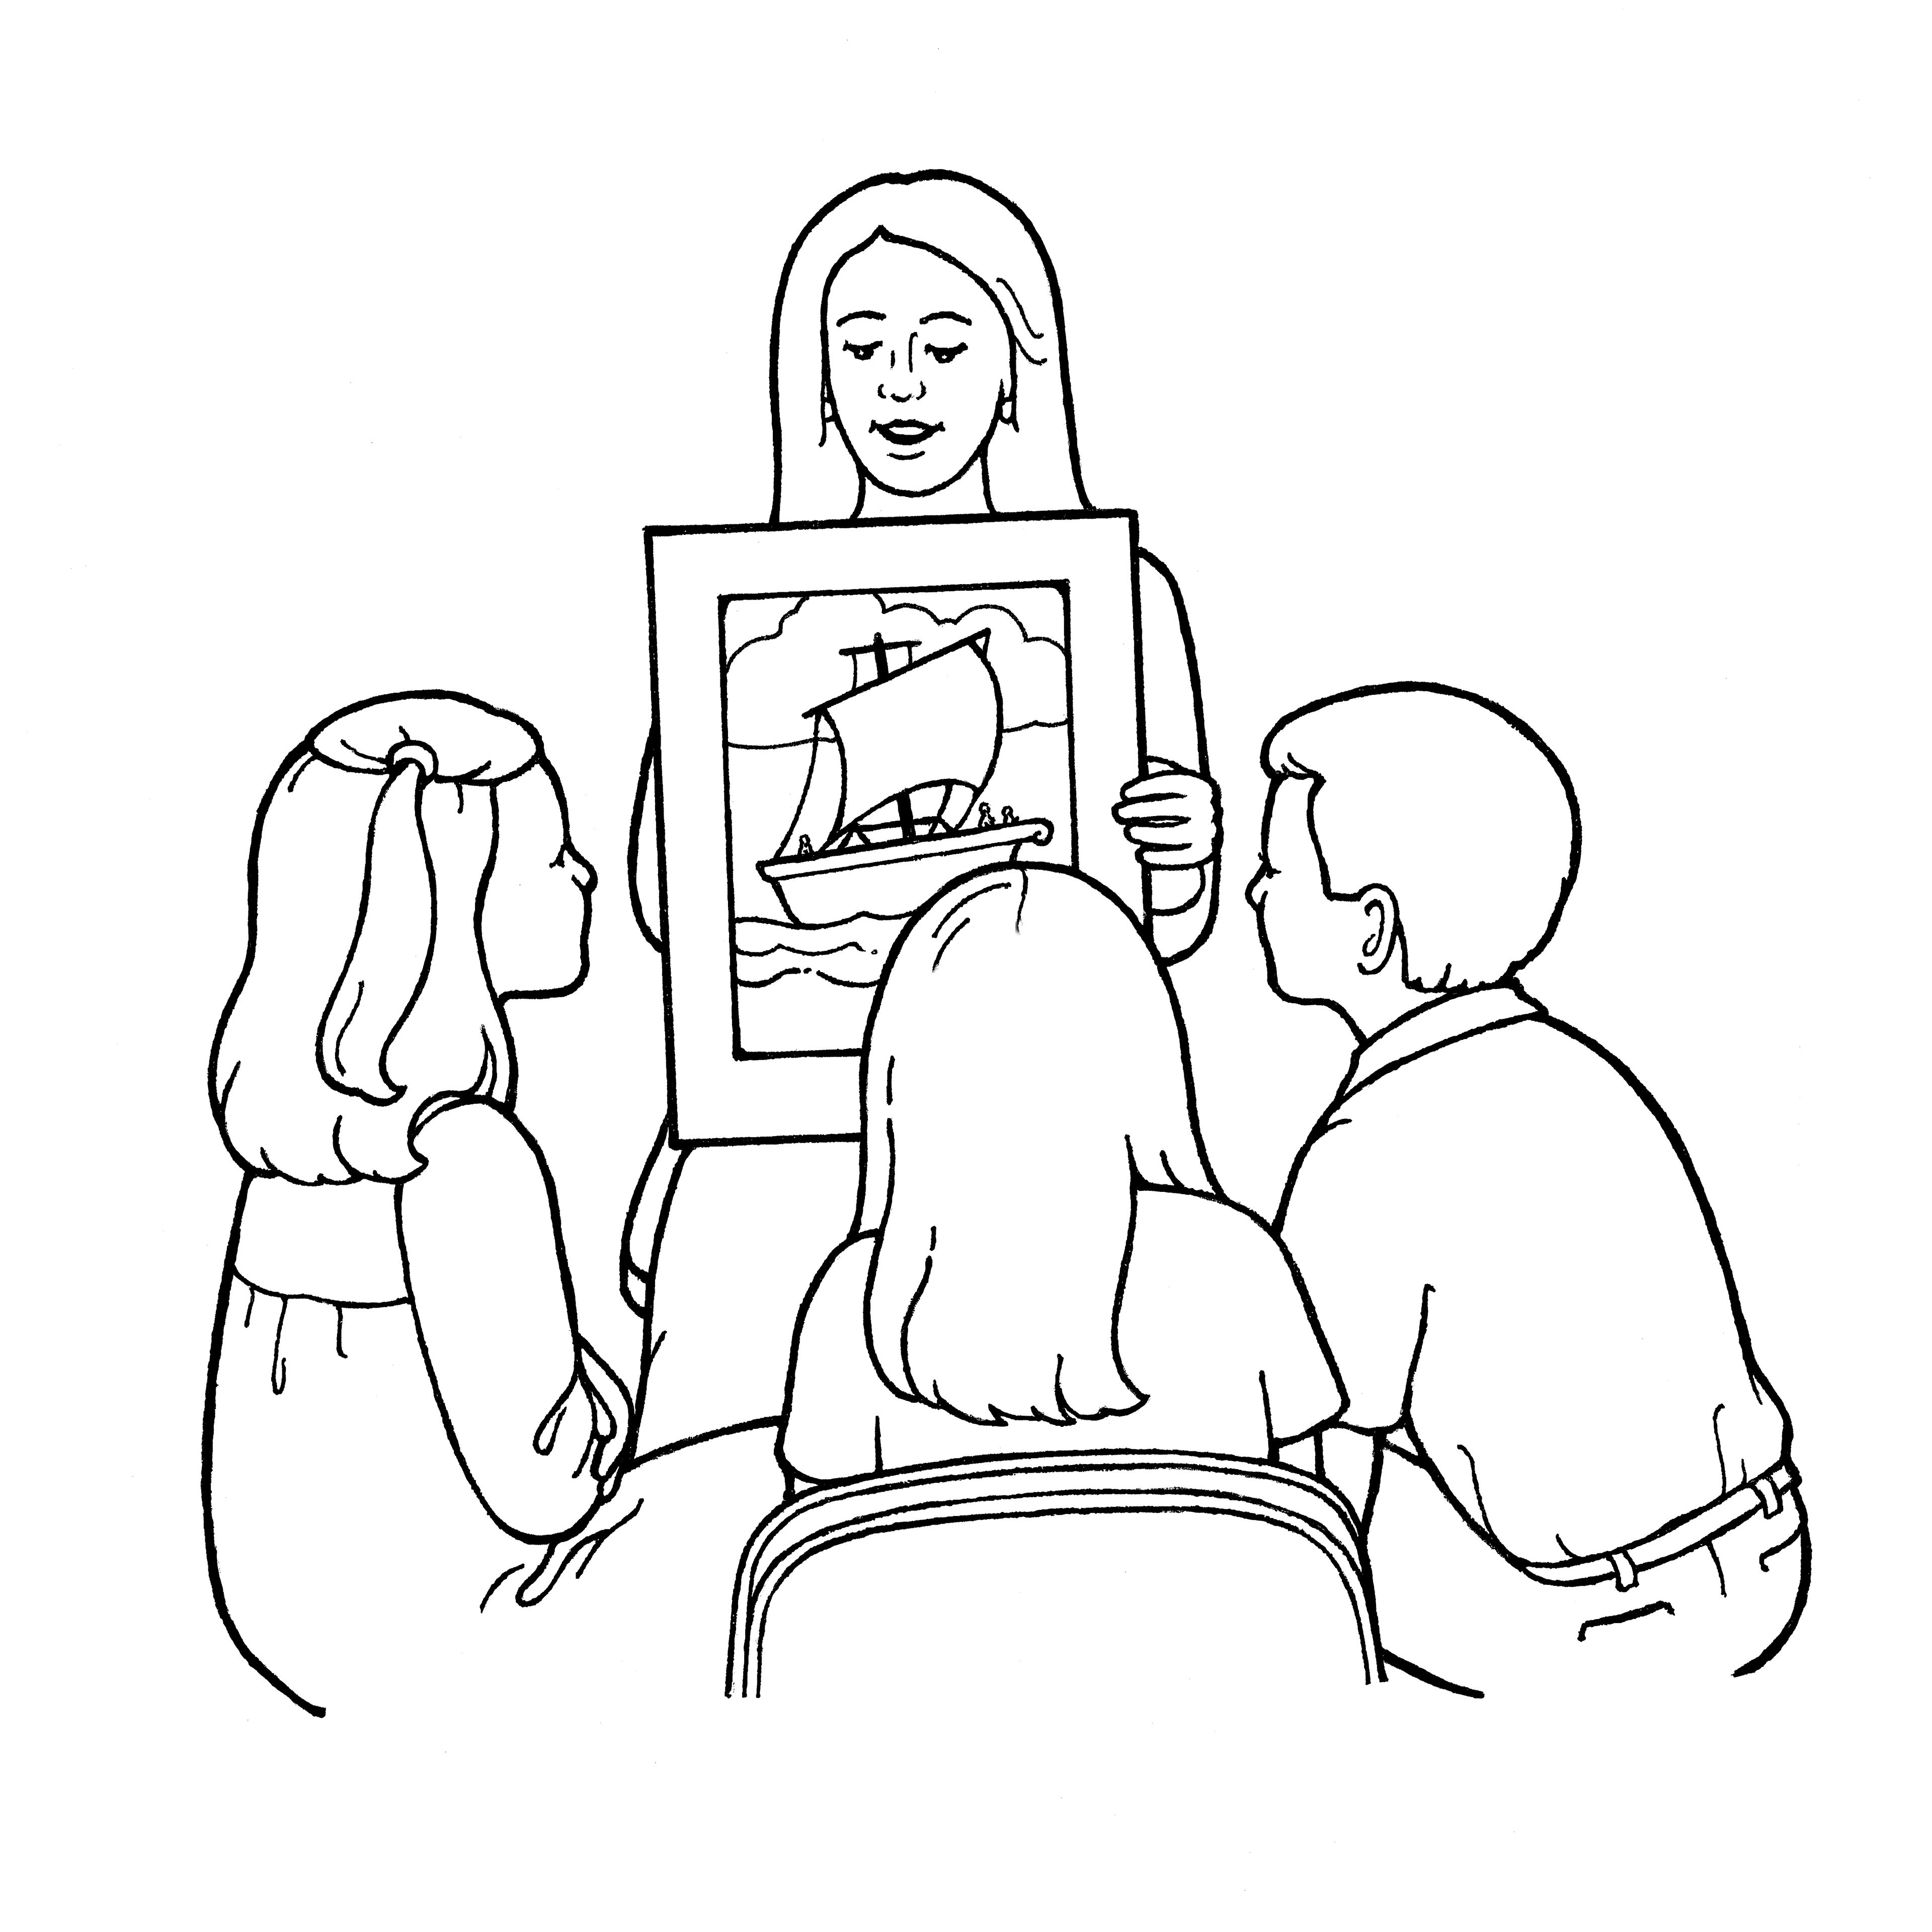 An illustration of a Primary teacher giving a lesson to the children using a picture of a boat.